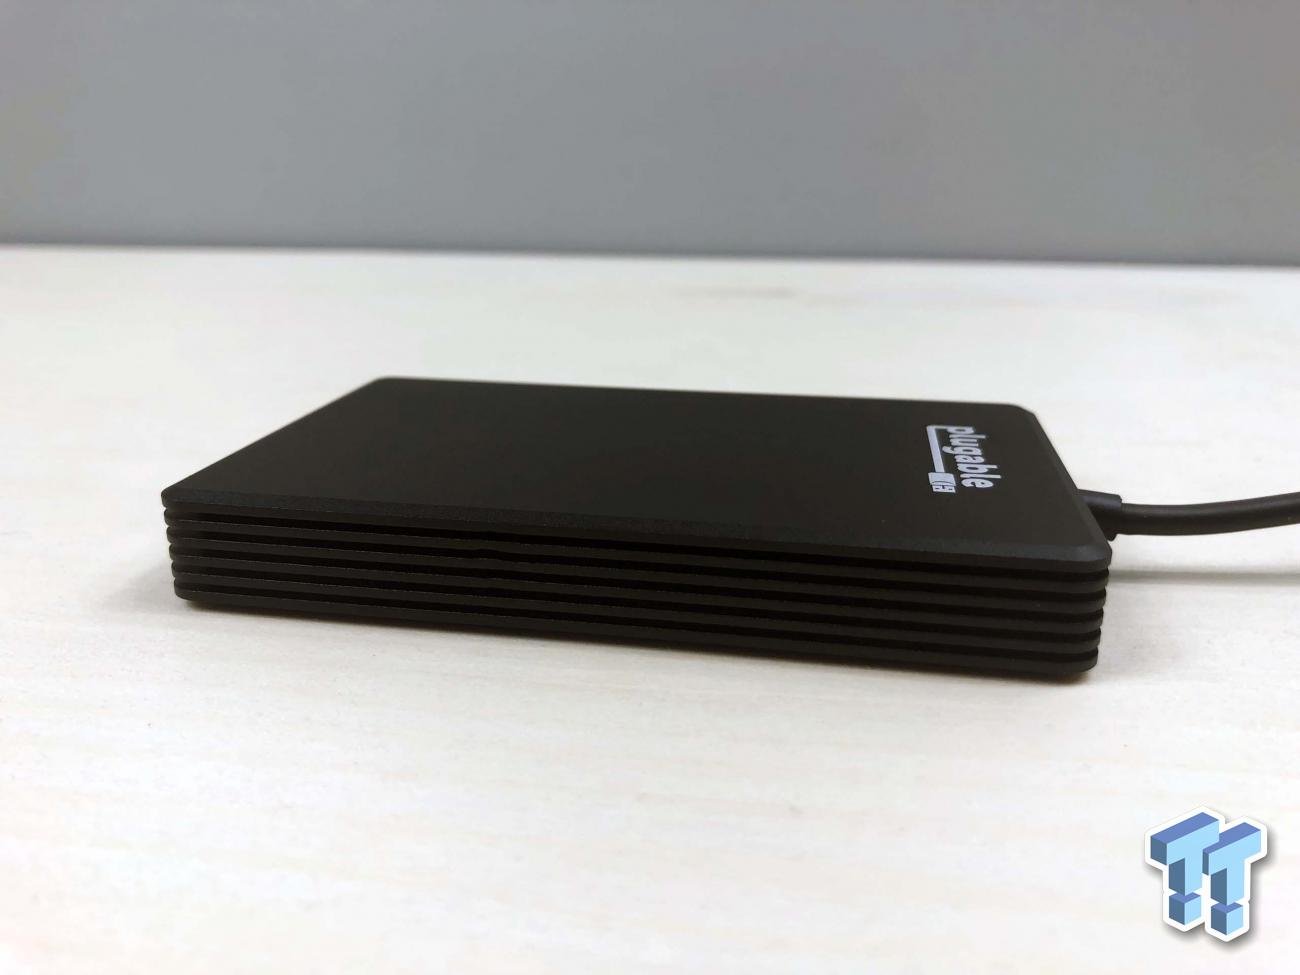 Plugable Thunderbolt 3 NVMe External SSD Review: Extreme Speed